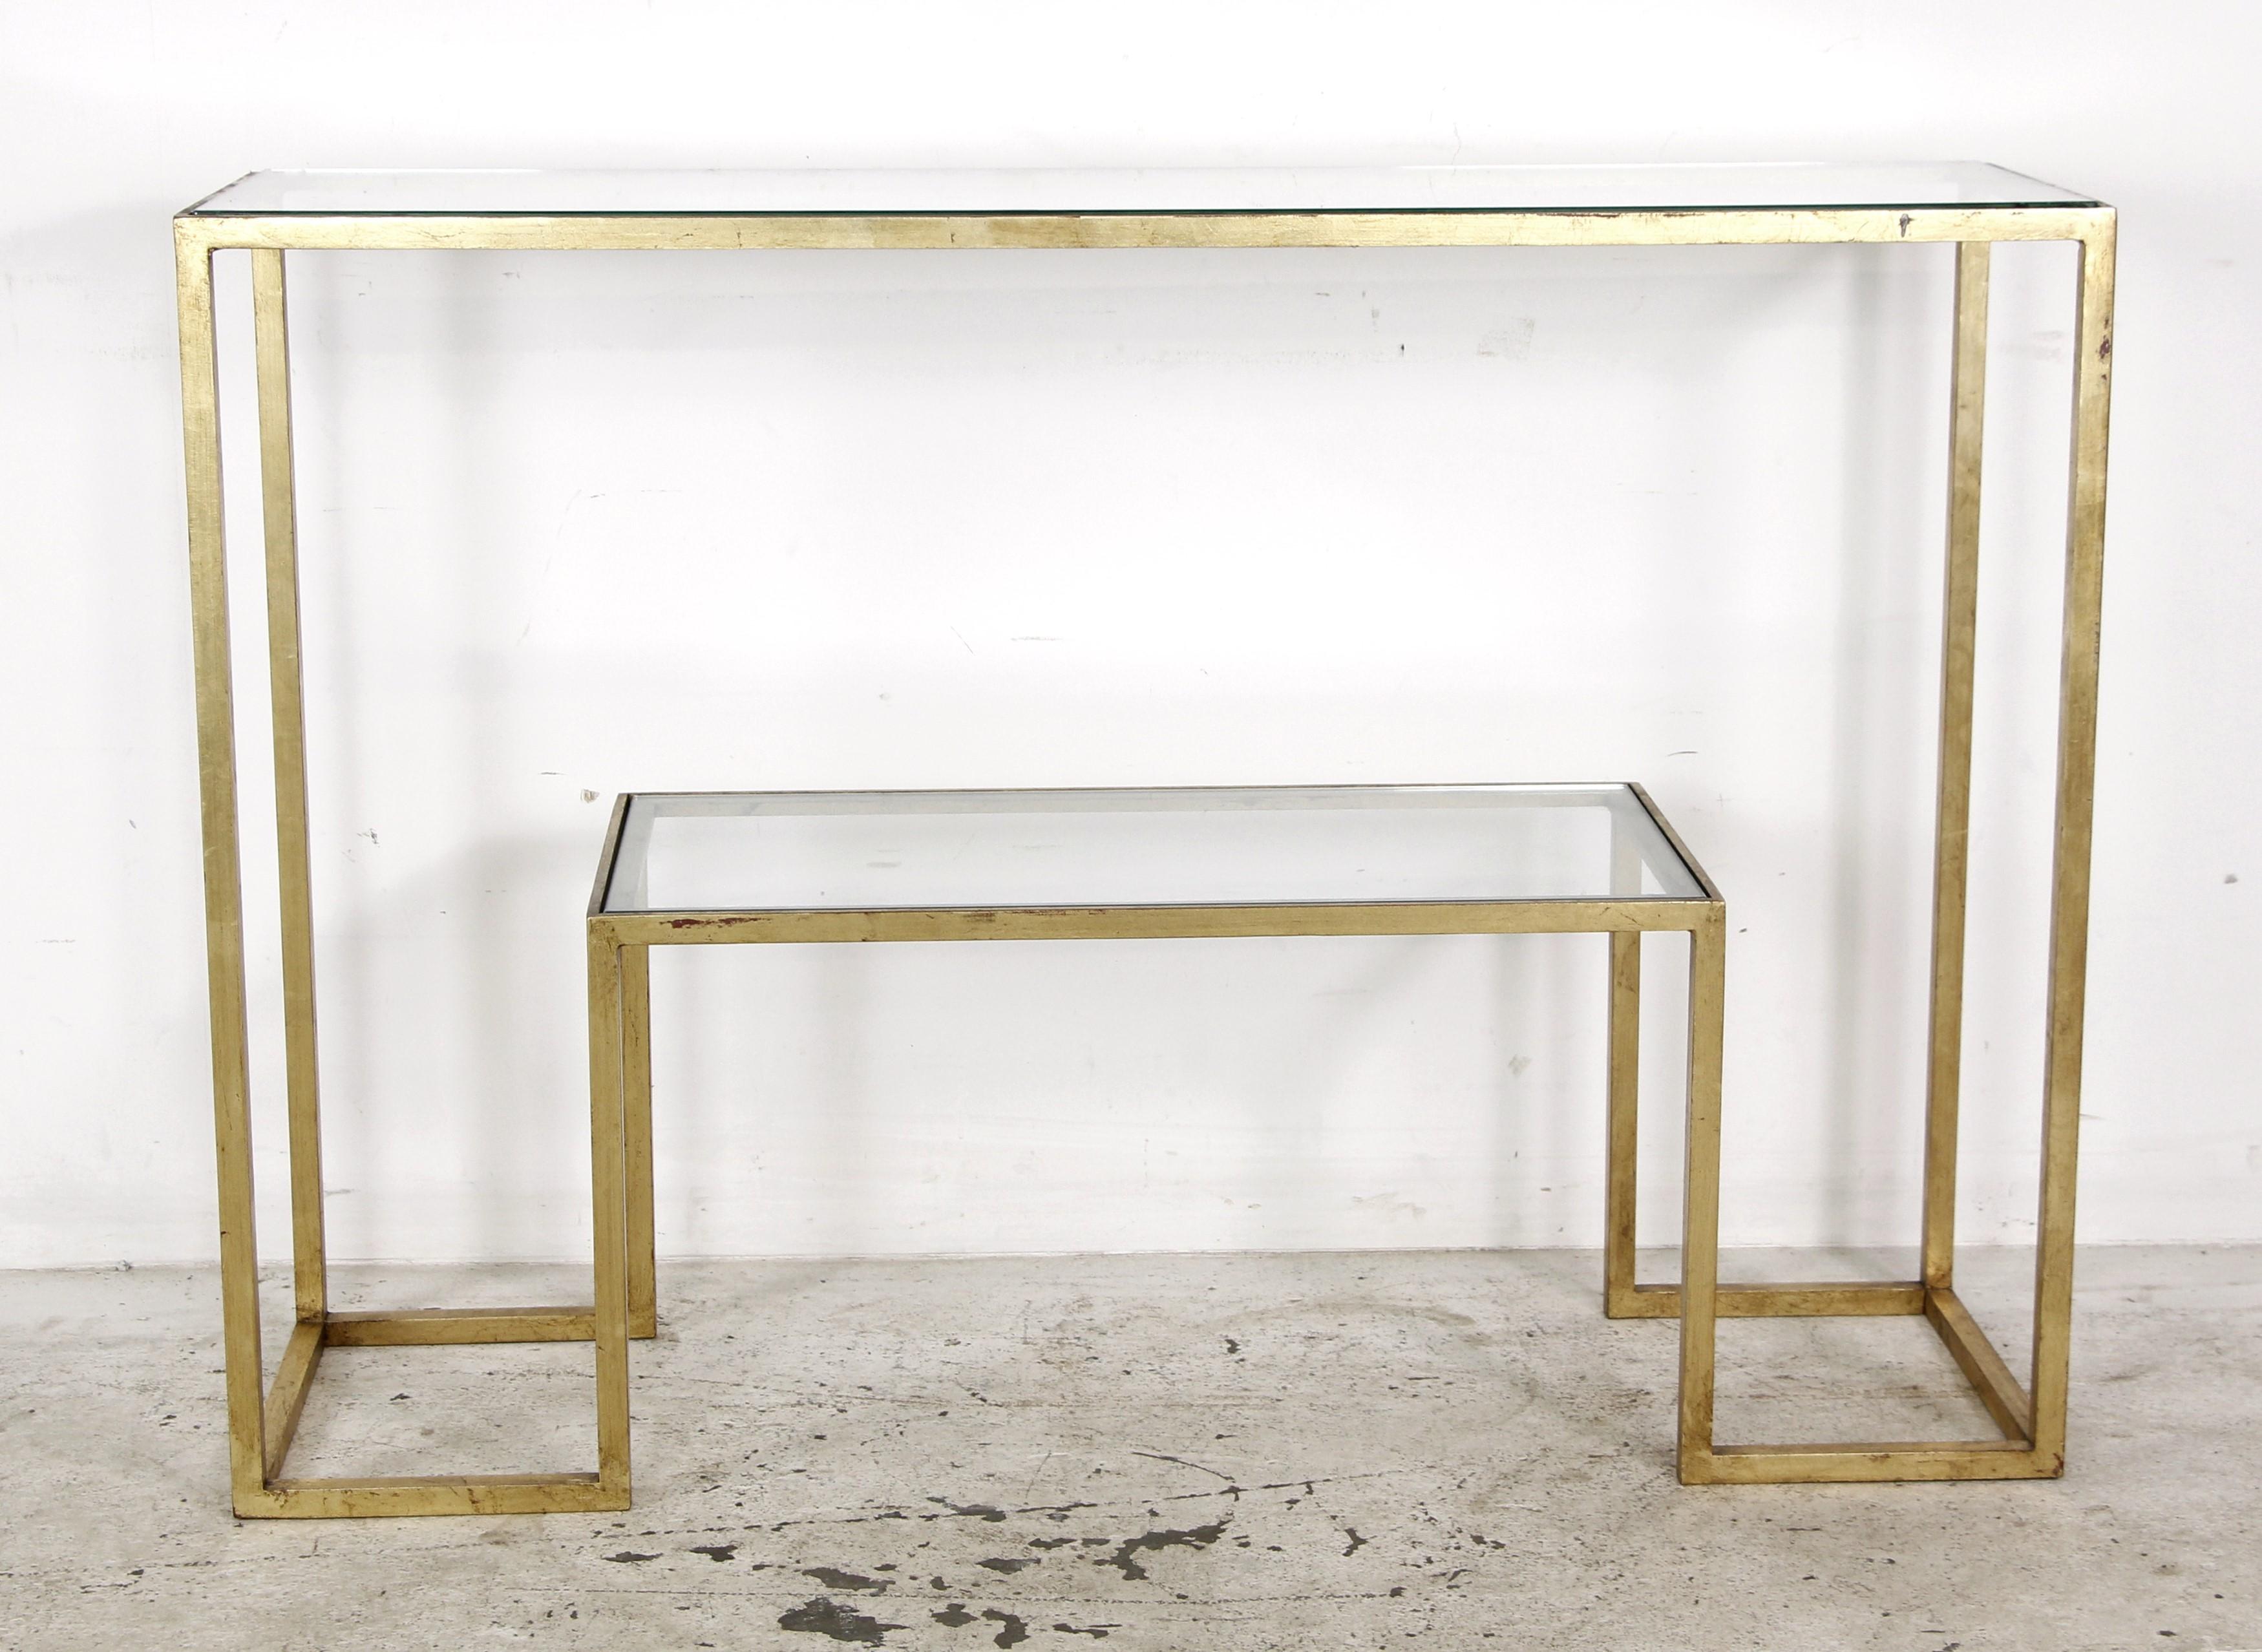 20th Century Jean Royere French Gild Steel Glass 2 Tier Console Table For Sale